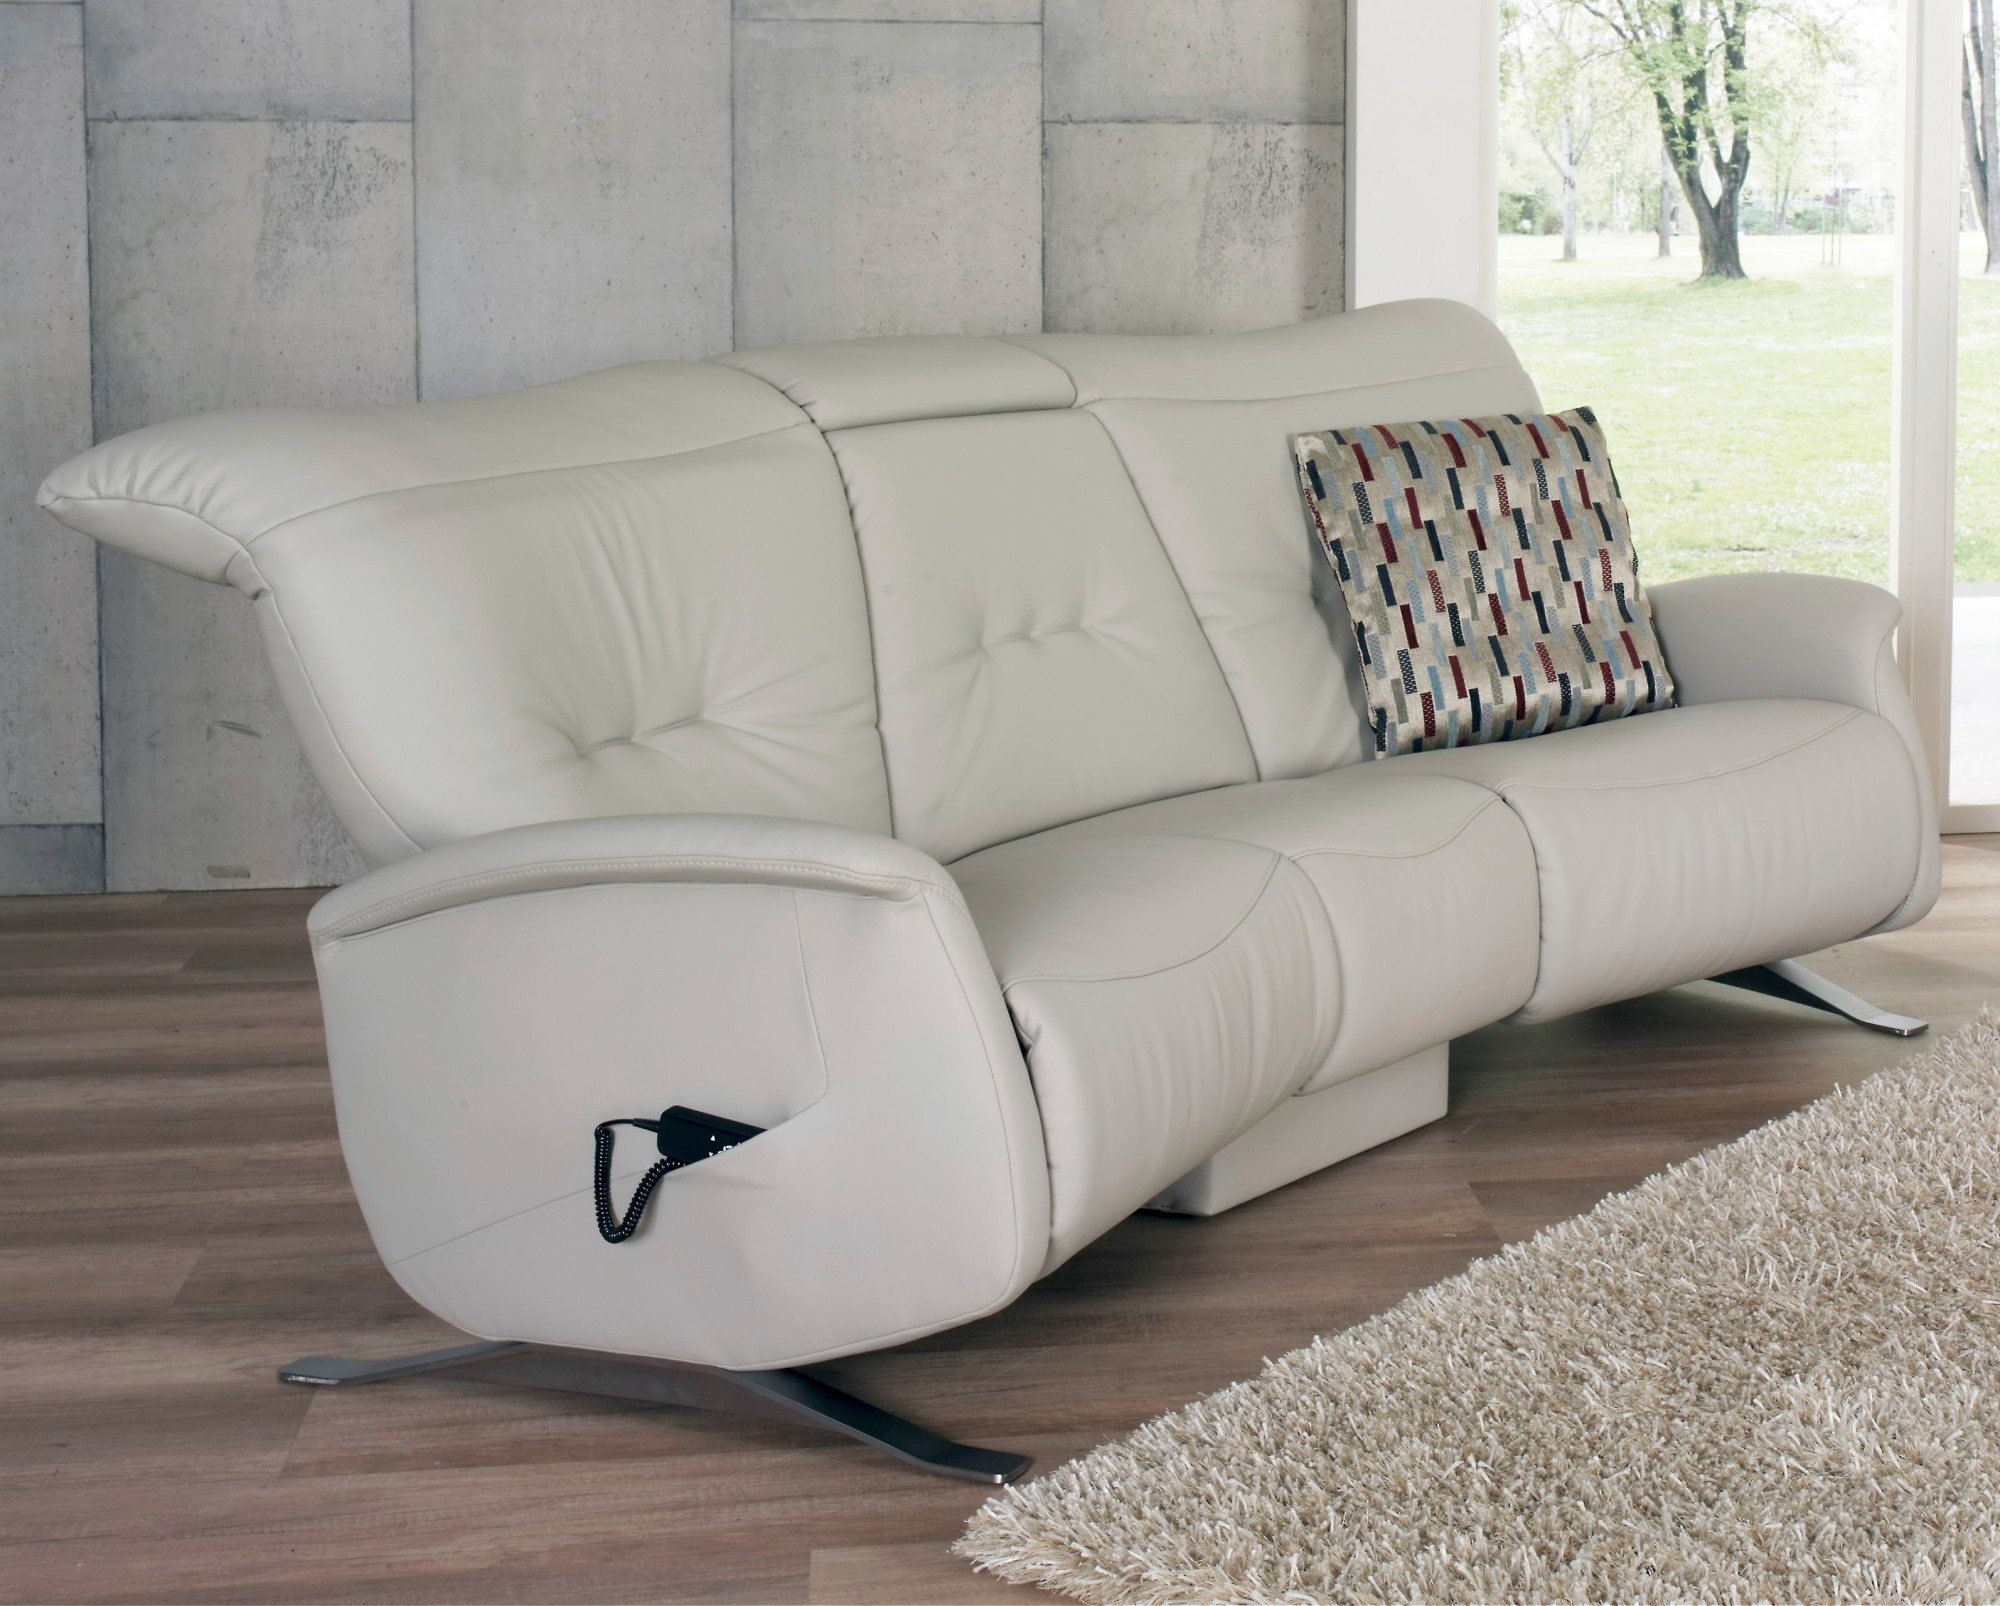 Himolla Cumuly Cygnet Sofas and Chairs range 